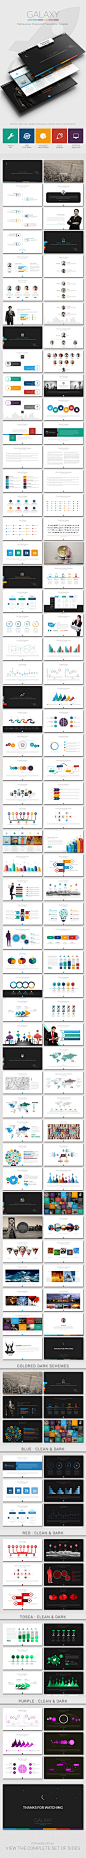 Galaxy Powerpoint Template - Business PowerPoint Templates